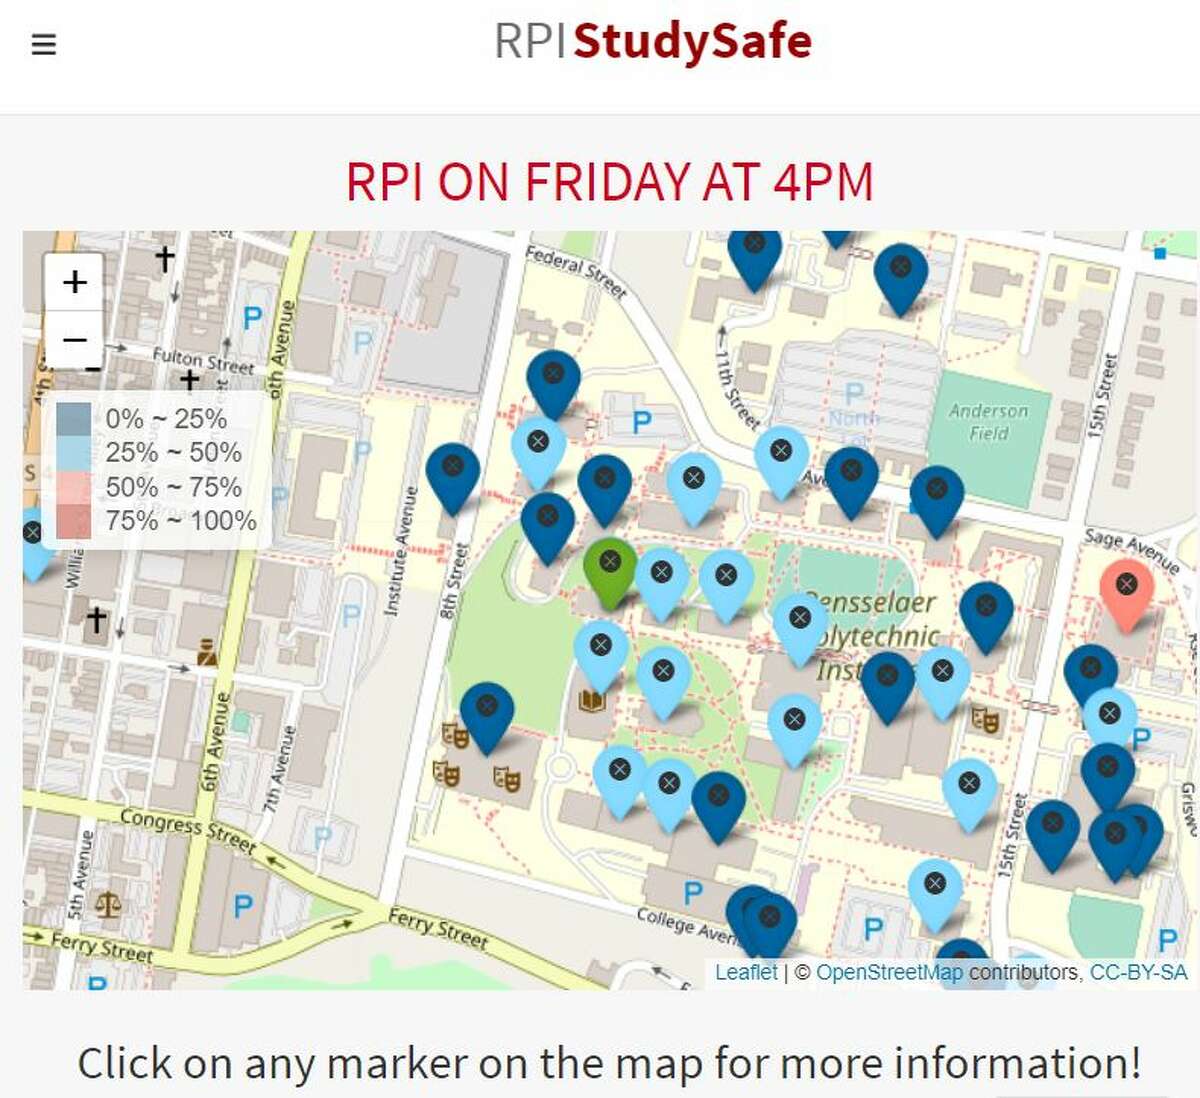 RPI's app provides students a real-time map of study spots that are uncrowded, which pose a lower Covid risk.